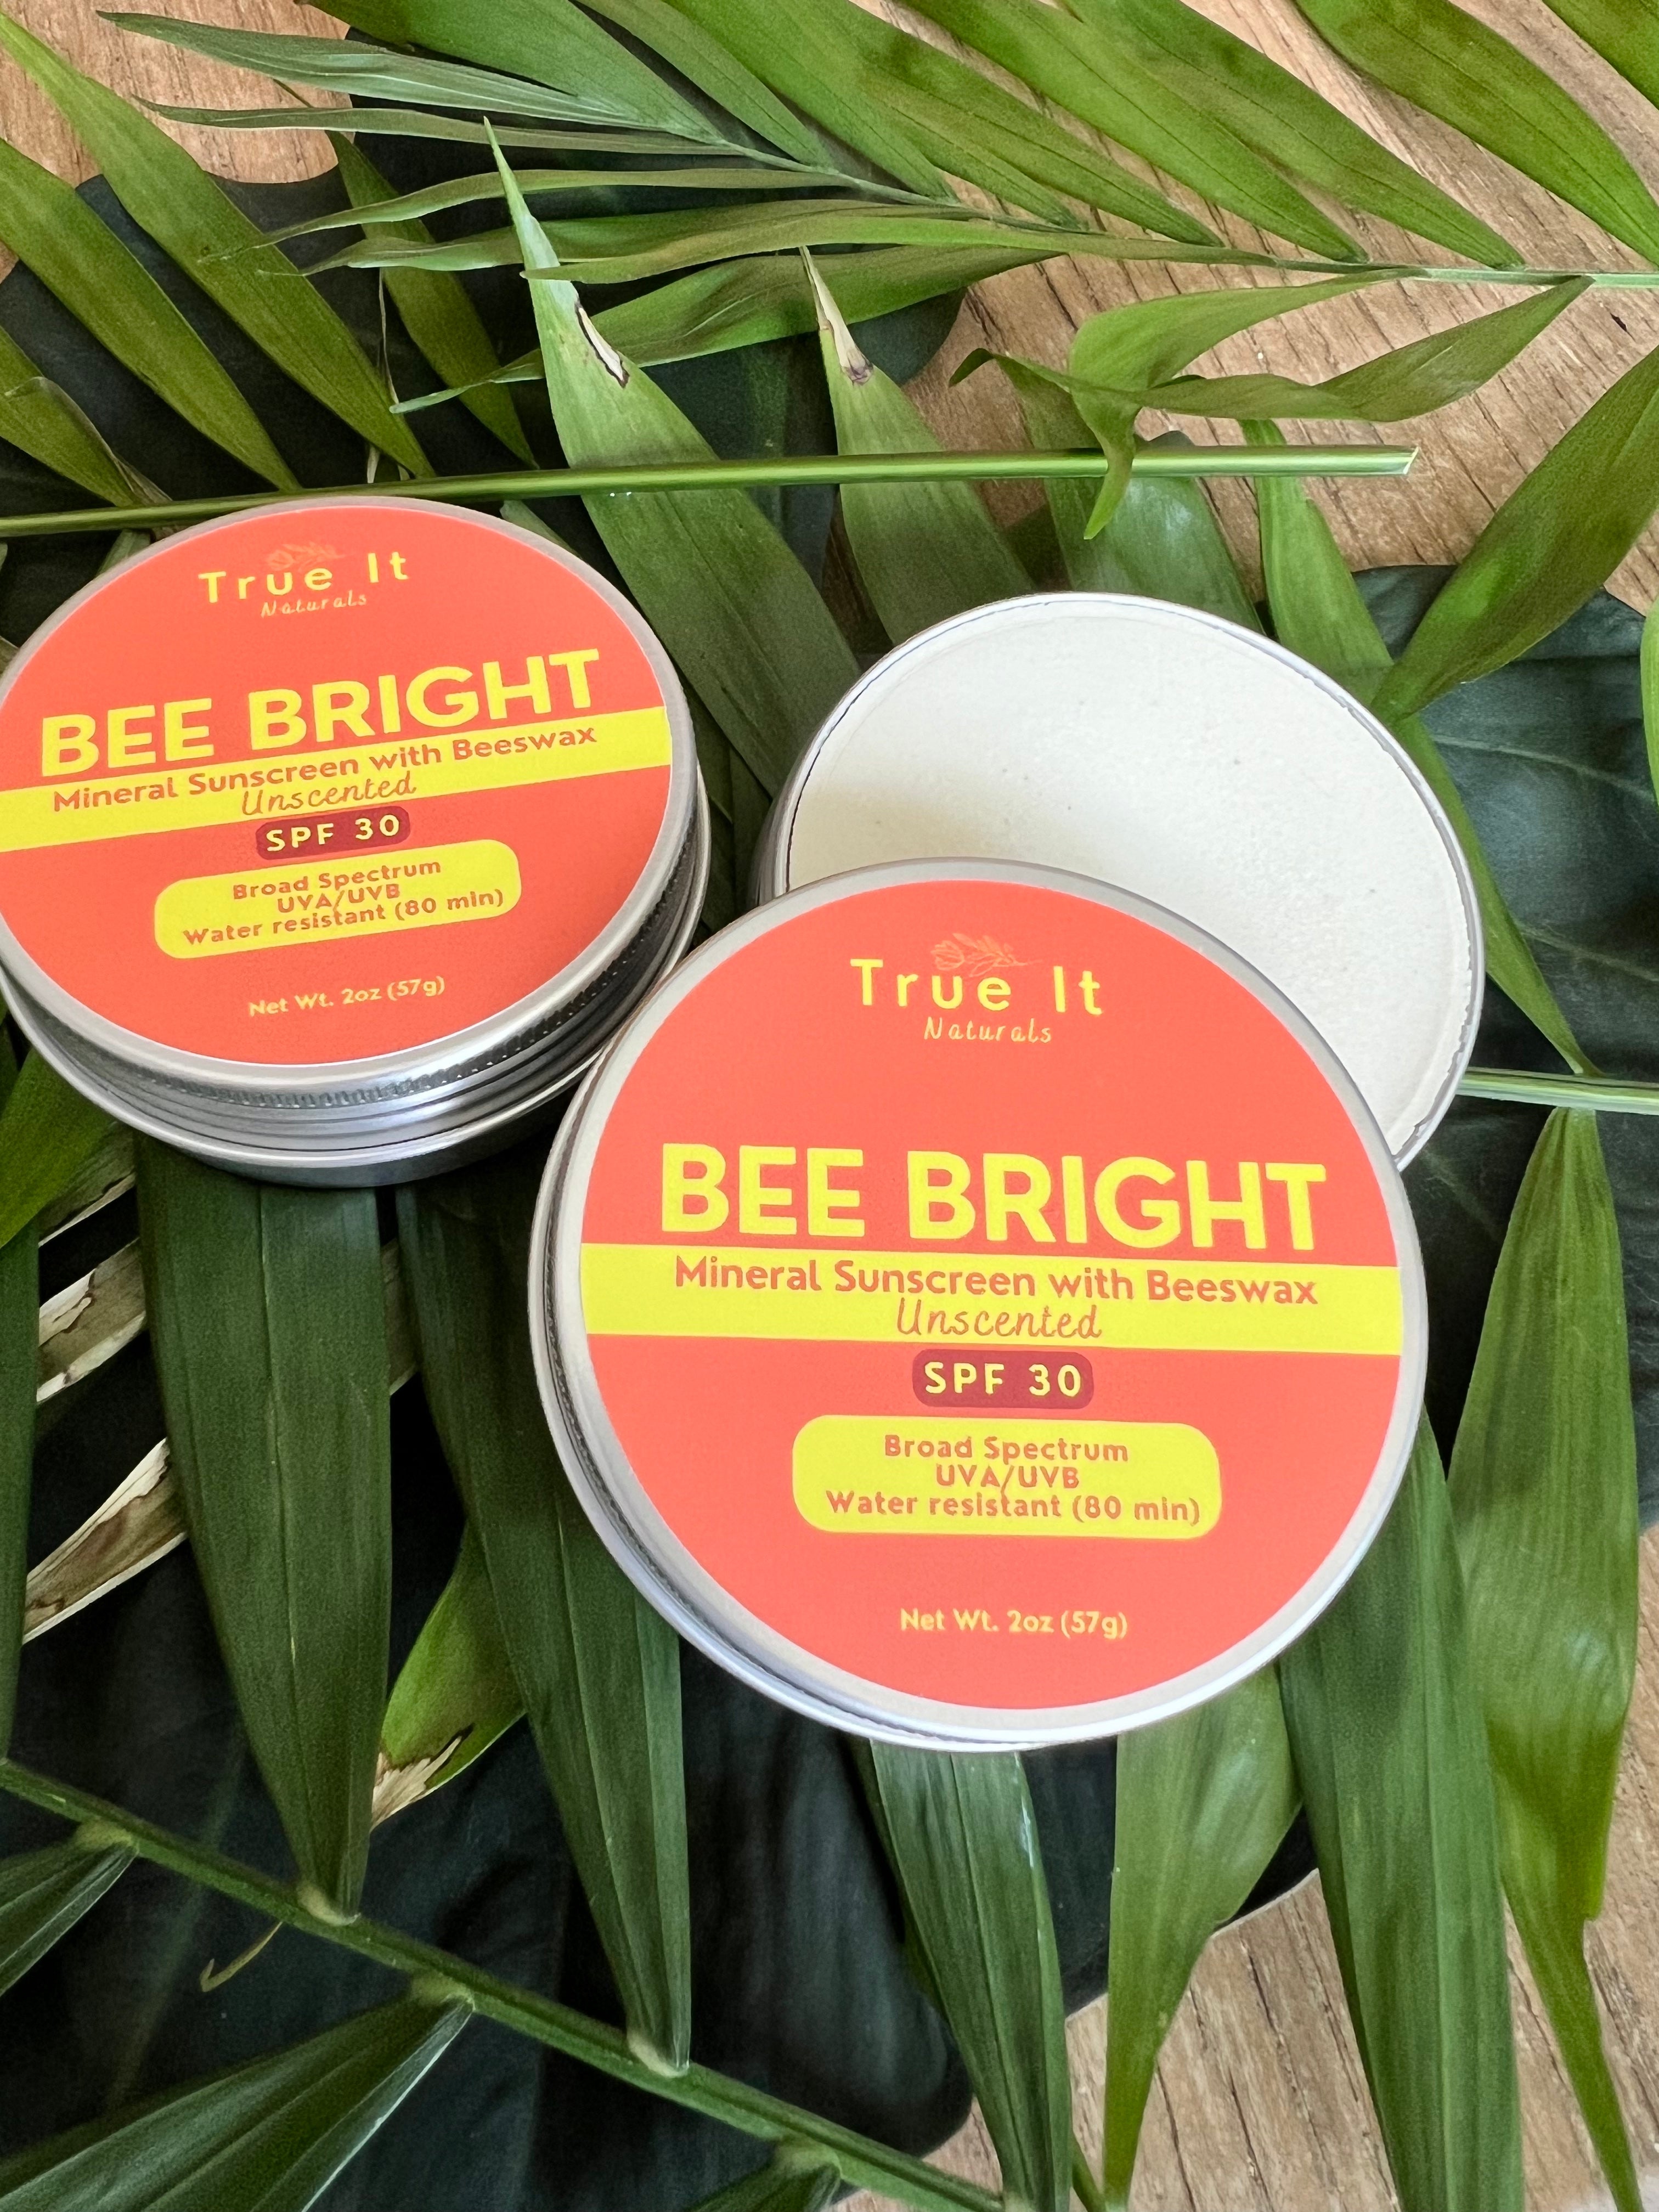 Unscented Mineral Sun Cream - BEE BRIGHT SPF 30 - Reef Safe - Non Nano Zinc Oxide - Beeswax - Organic - Water Resistant - 2 oz